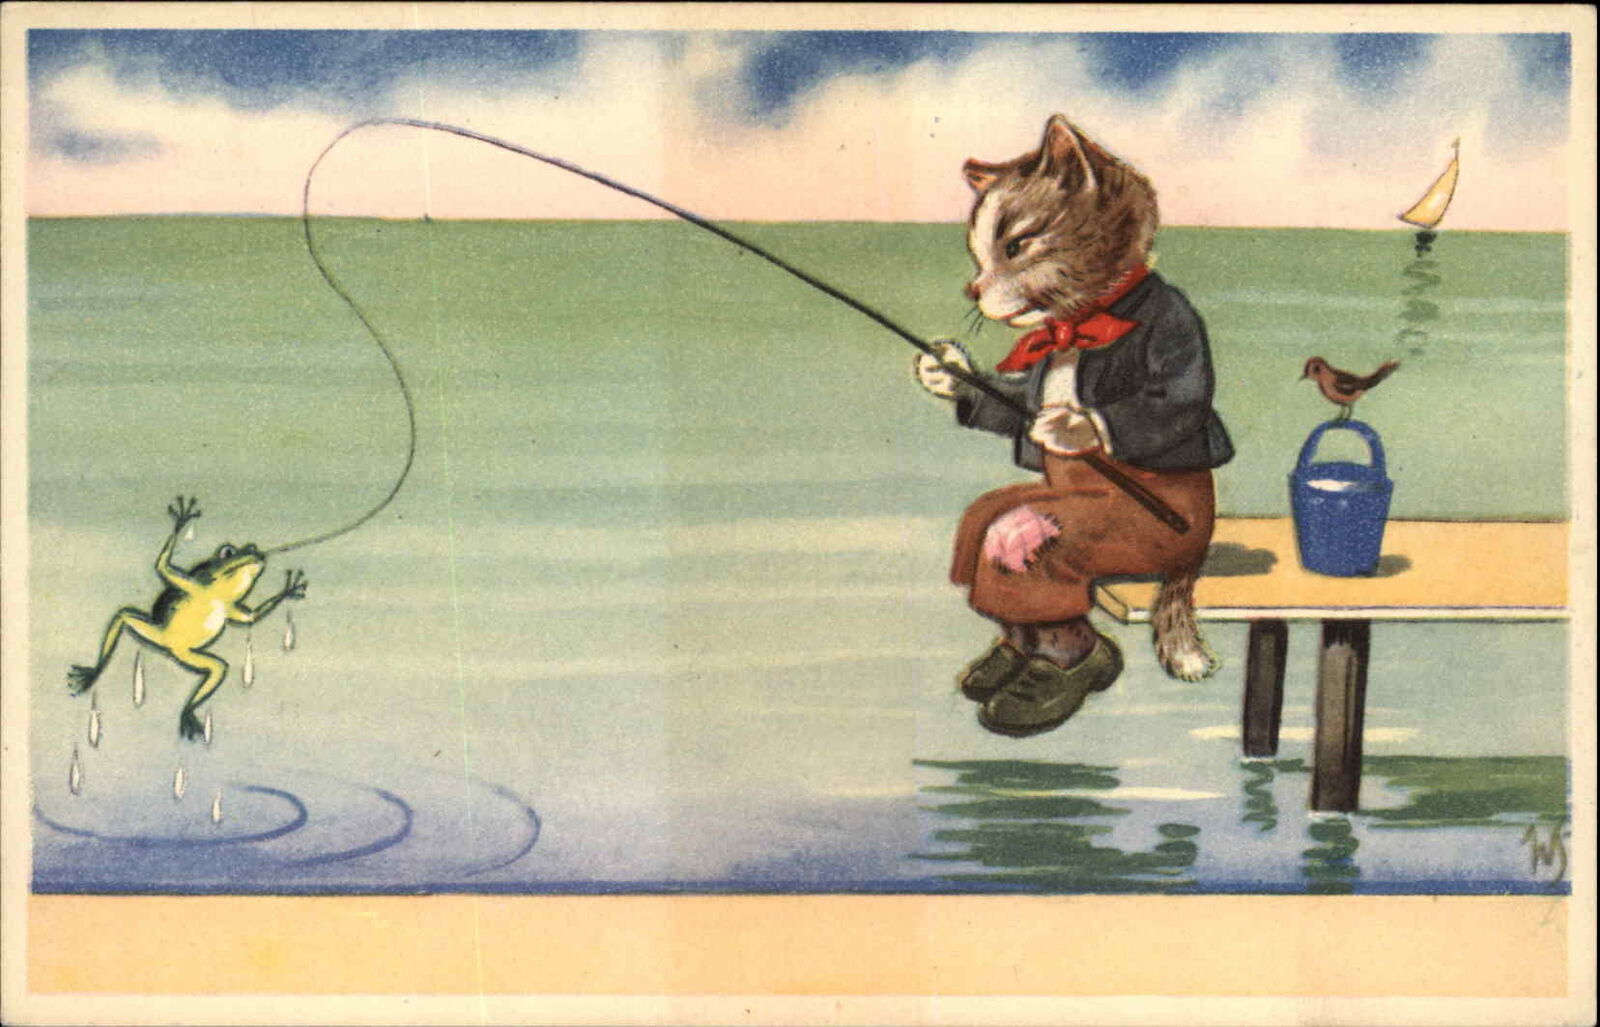 WS Fantasy Dressed Cat Fishing Catches Frog Vintage Postcard